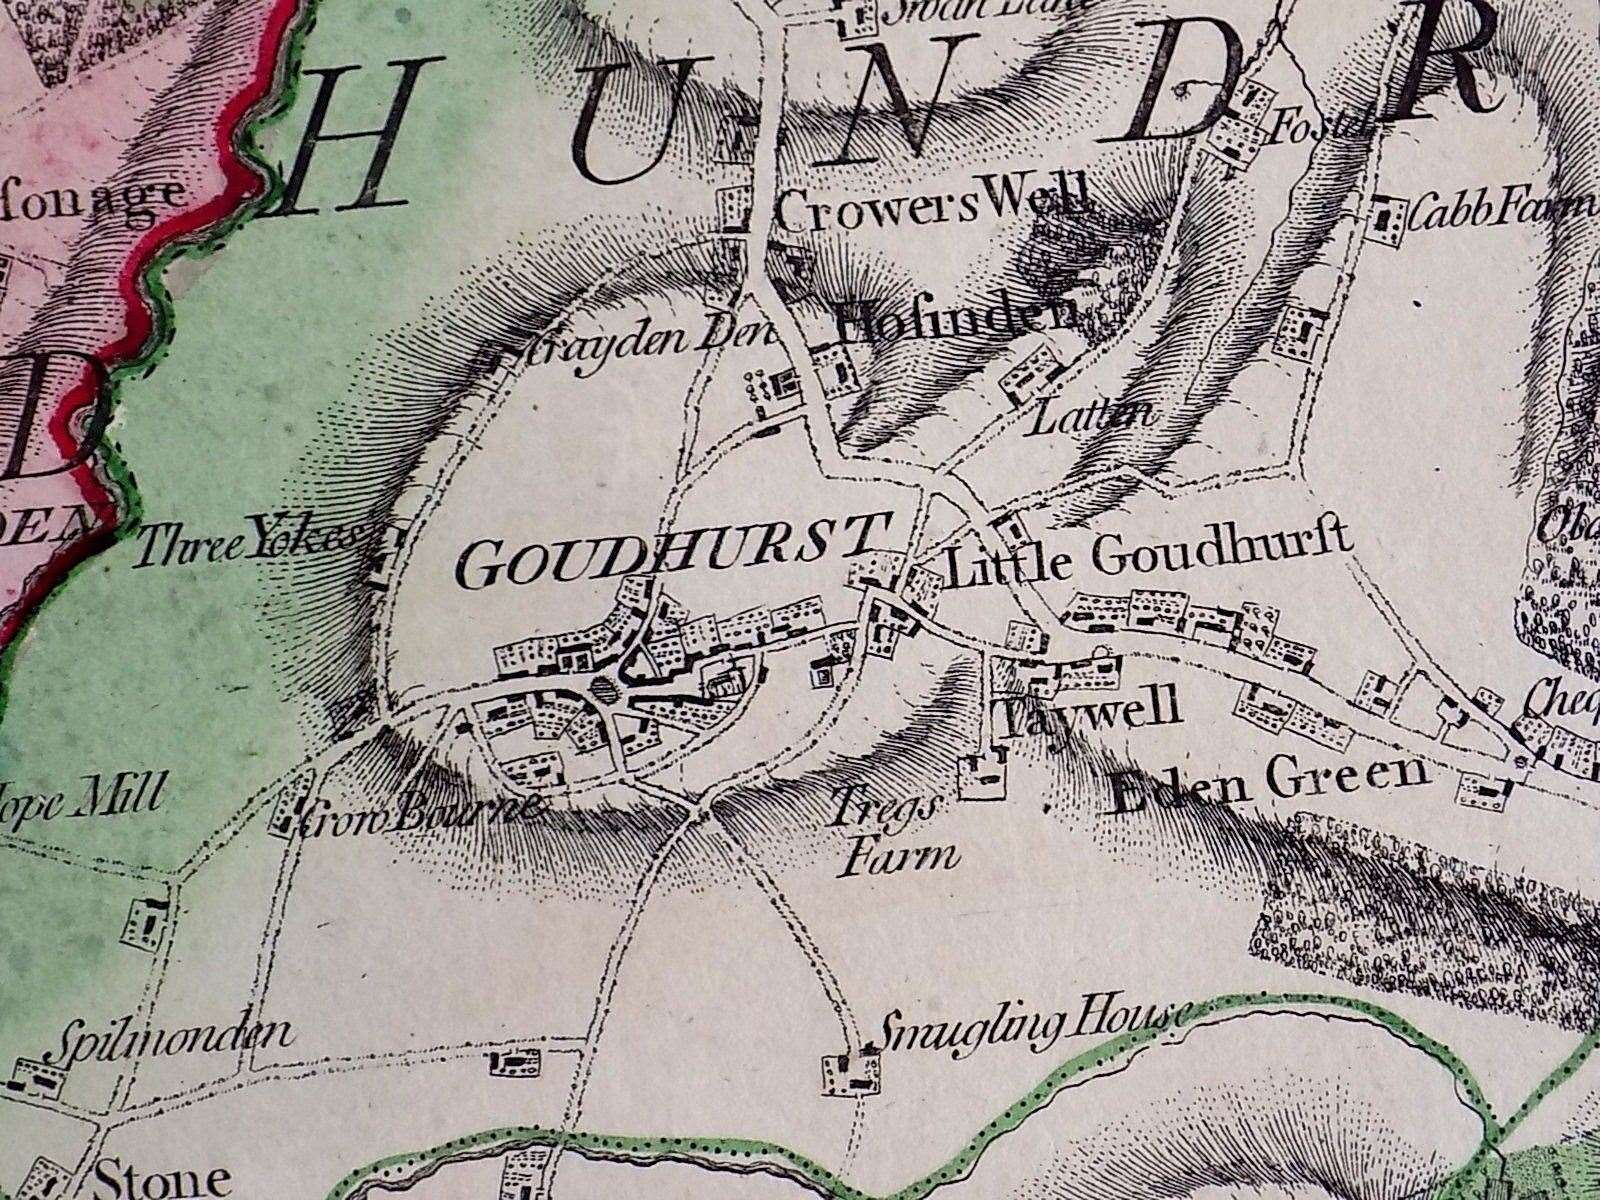 A map of Goudhurst from 1769